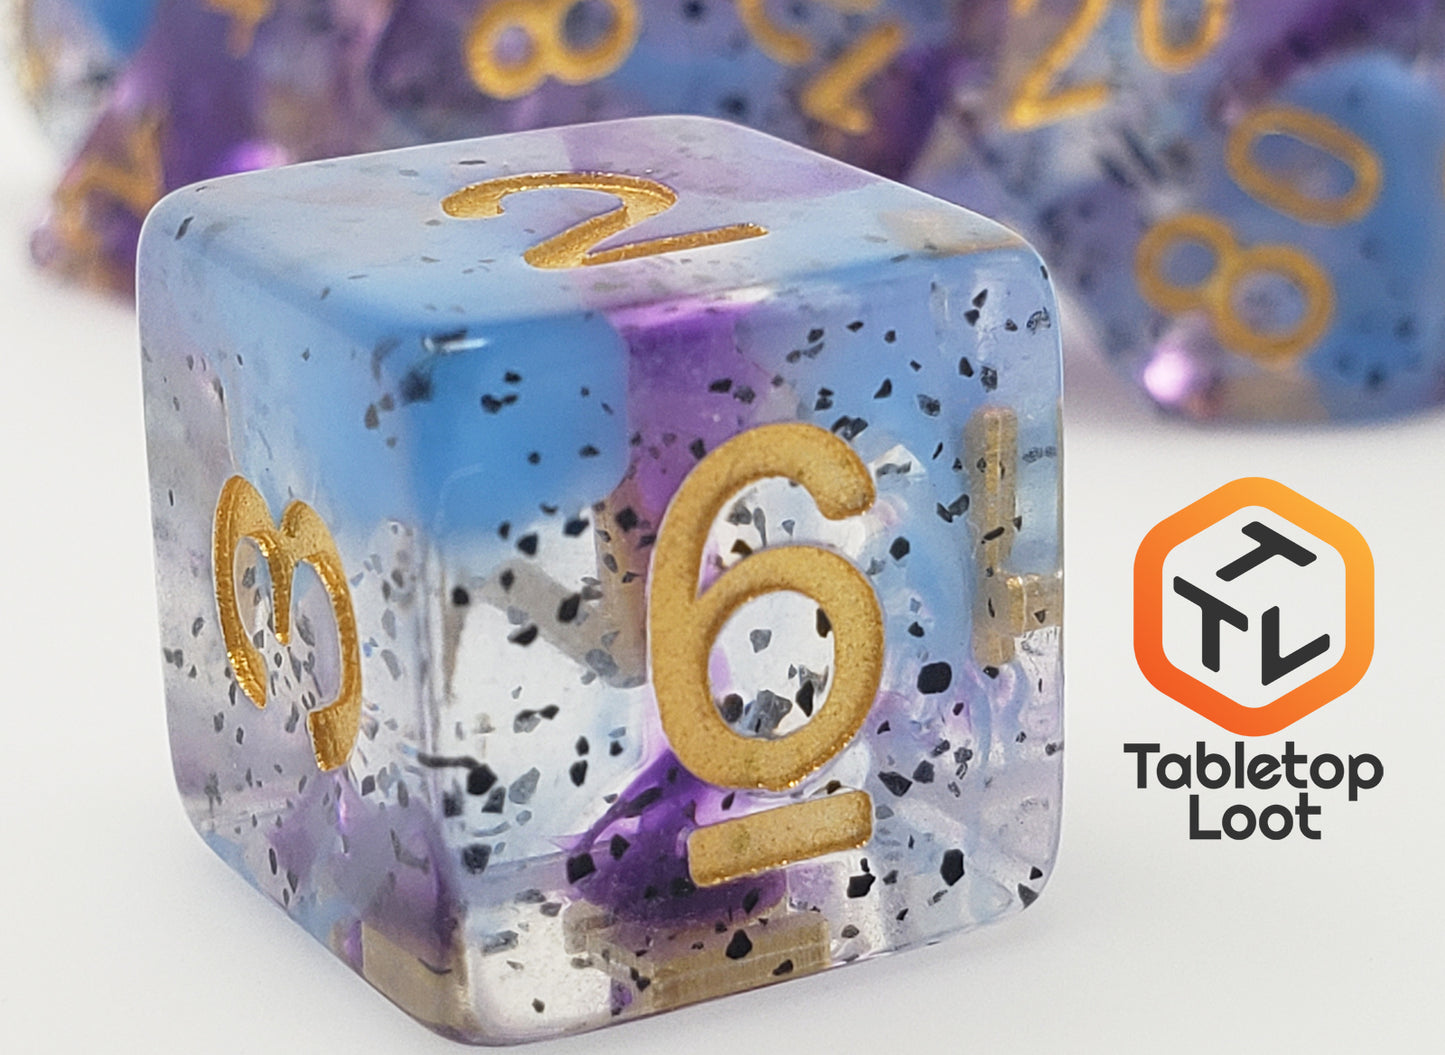 A close up of the D6 for the Infestation 7 piece dice set from Tabletop Loot with swirls of blue and purple and dark speckles suspended in a clear resin with gold numbering.